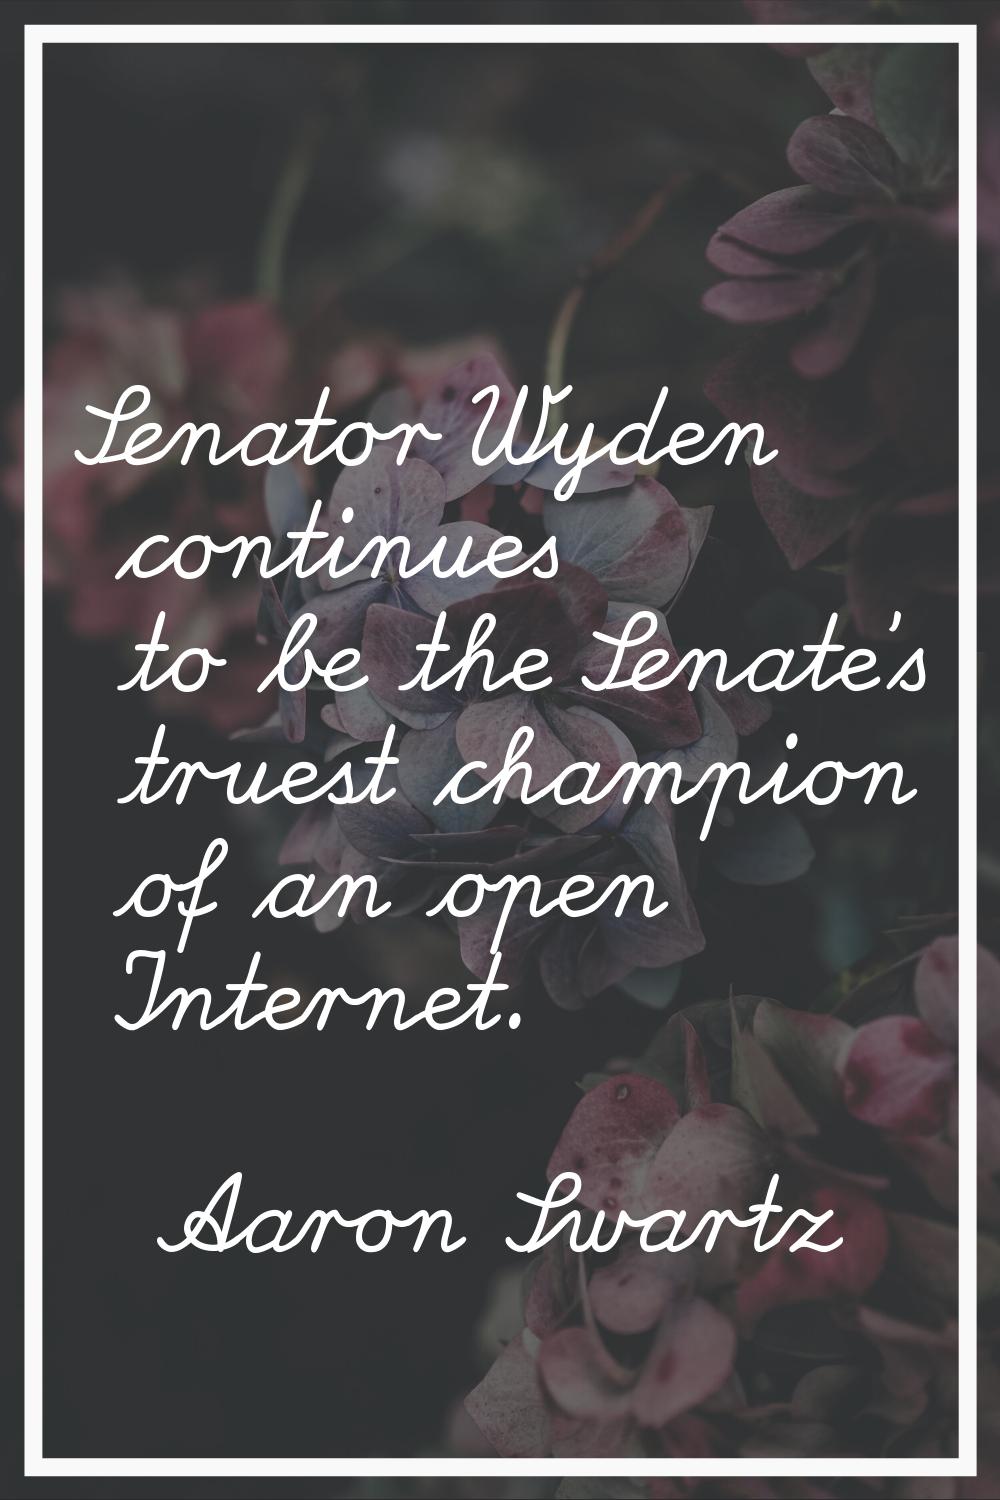 Senator Wyden continues to be the Senate's truest champion of an open Internet.